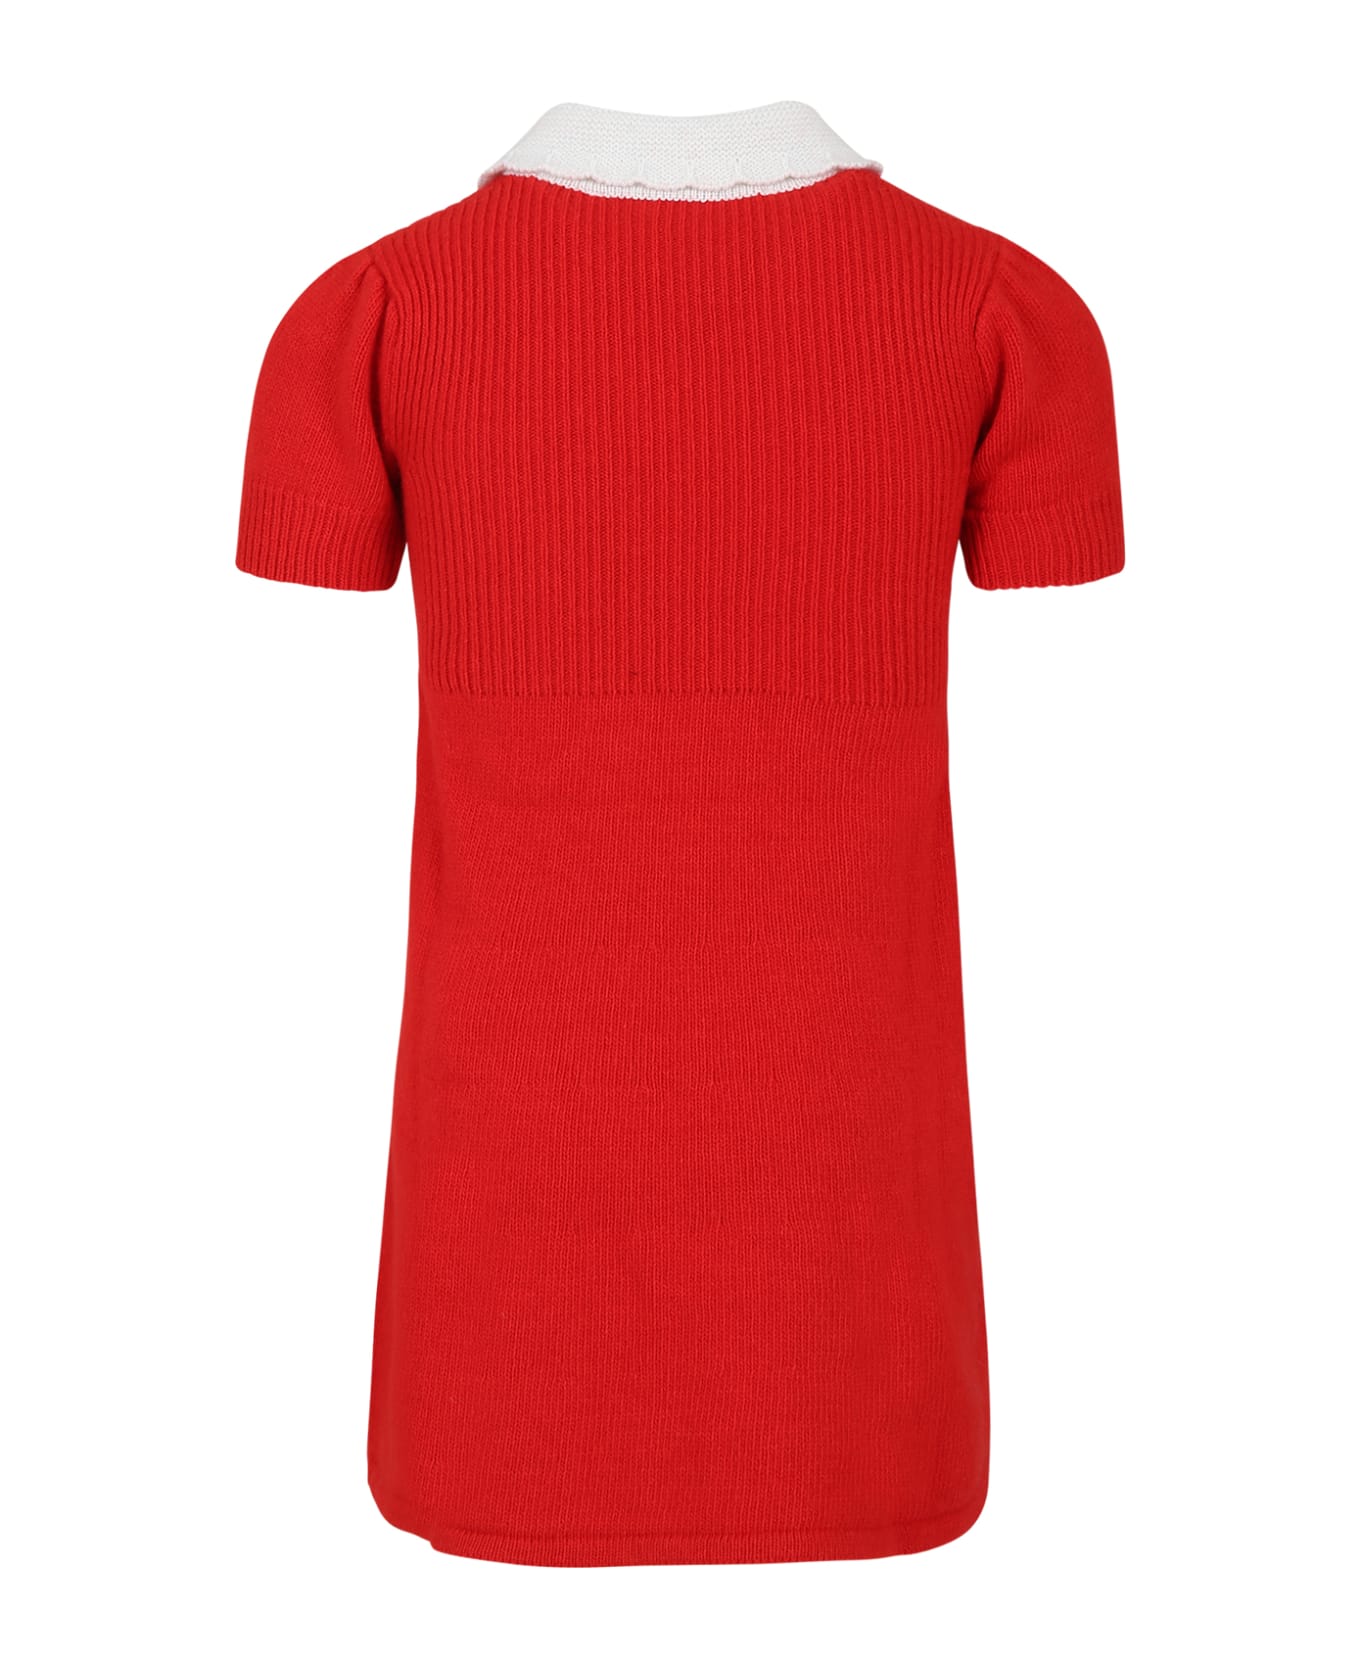 Philosophy di Lorenzo Serafini Kids Red Dress For Girl With Bow - Red